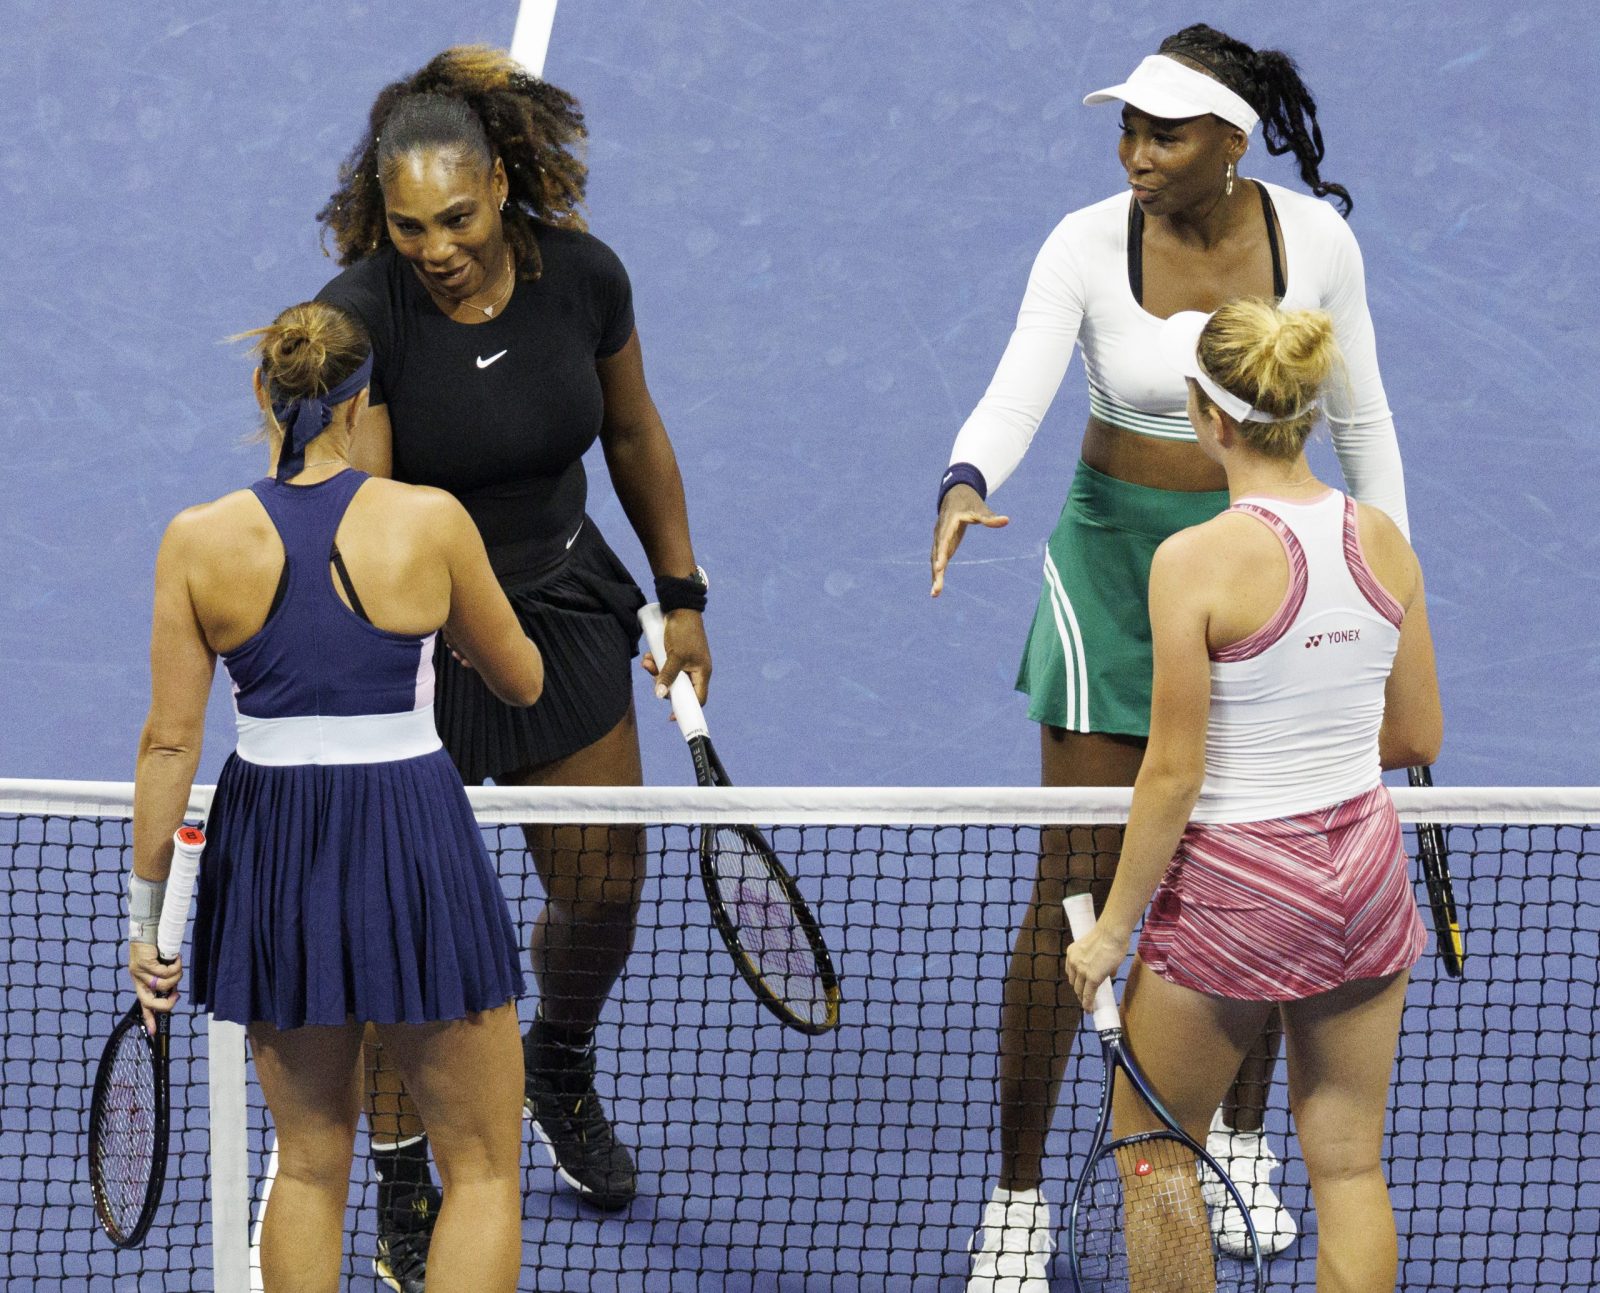 epa10153734 Serena Williams (2-L) and Venus Williams (R) of the USA greet Linda Noskova (2-R) and Lucie Hradecka (L) of the Czech Republic following the Williams' loss in the first round women's doubles match during the US Open Tennis Championships at the USTA National Tennis Center in in Flushing Meadows, New York, USA, 01 September 2022. The US Open runs from 29 August through 11 September.  EPA/CJ GUNTHER